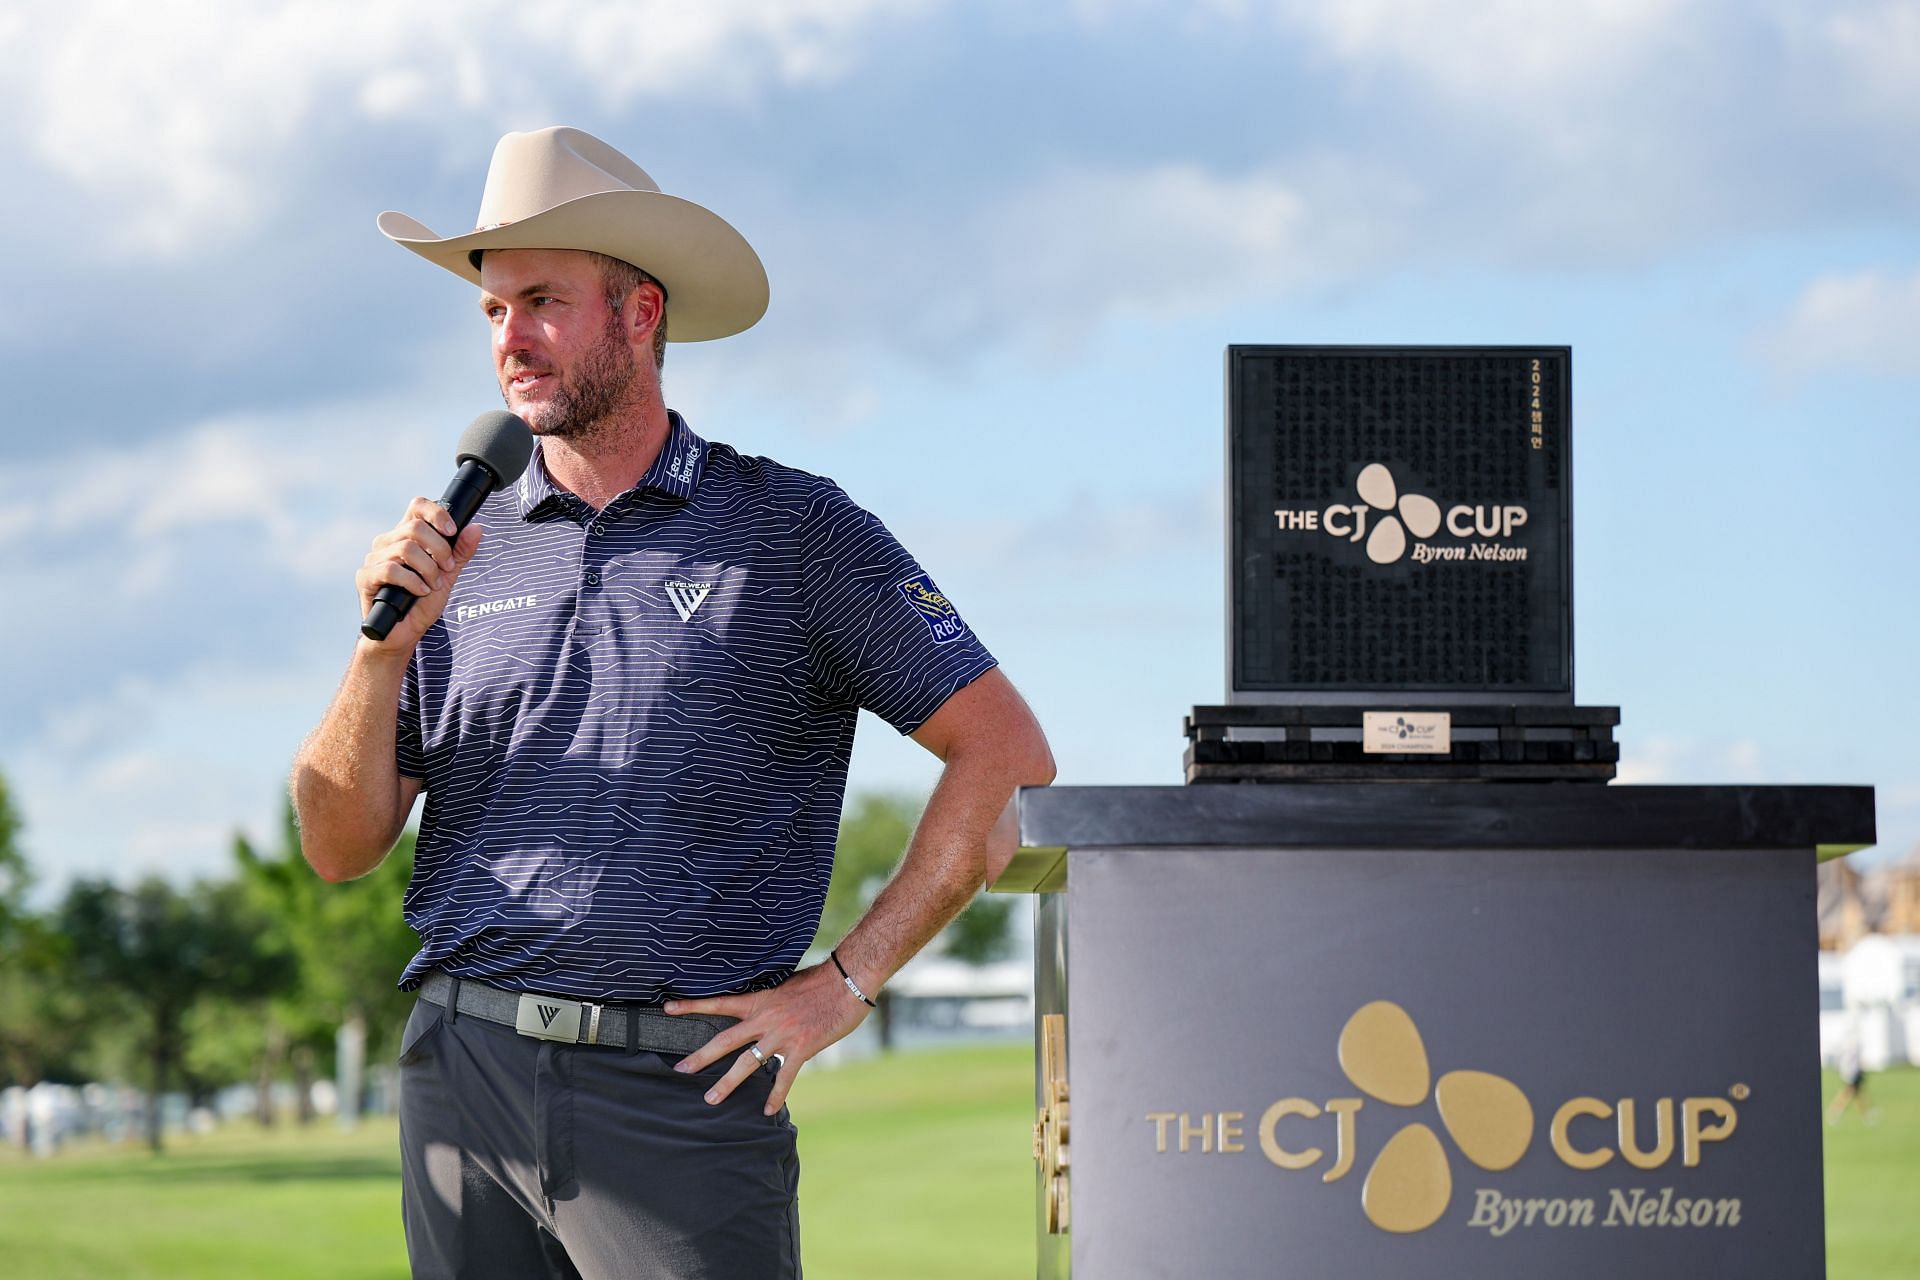 THE CJ CUP Byron Nelson - Final Round